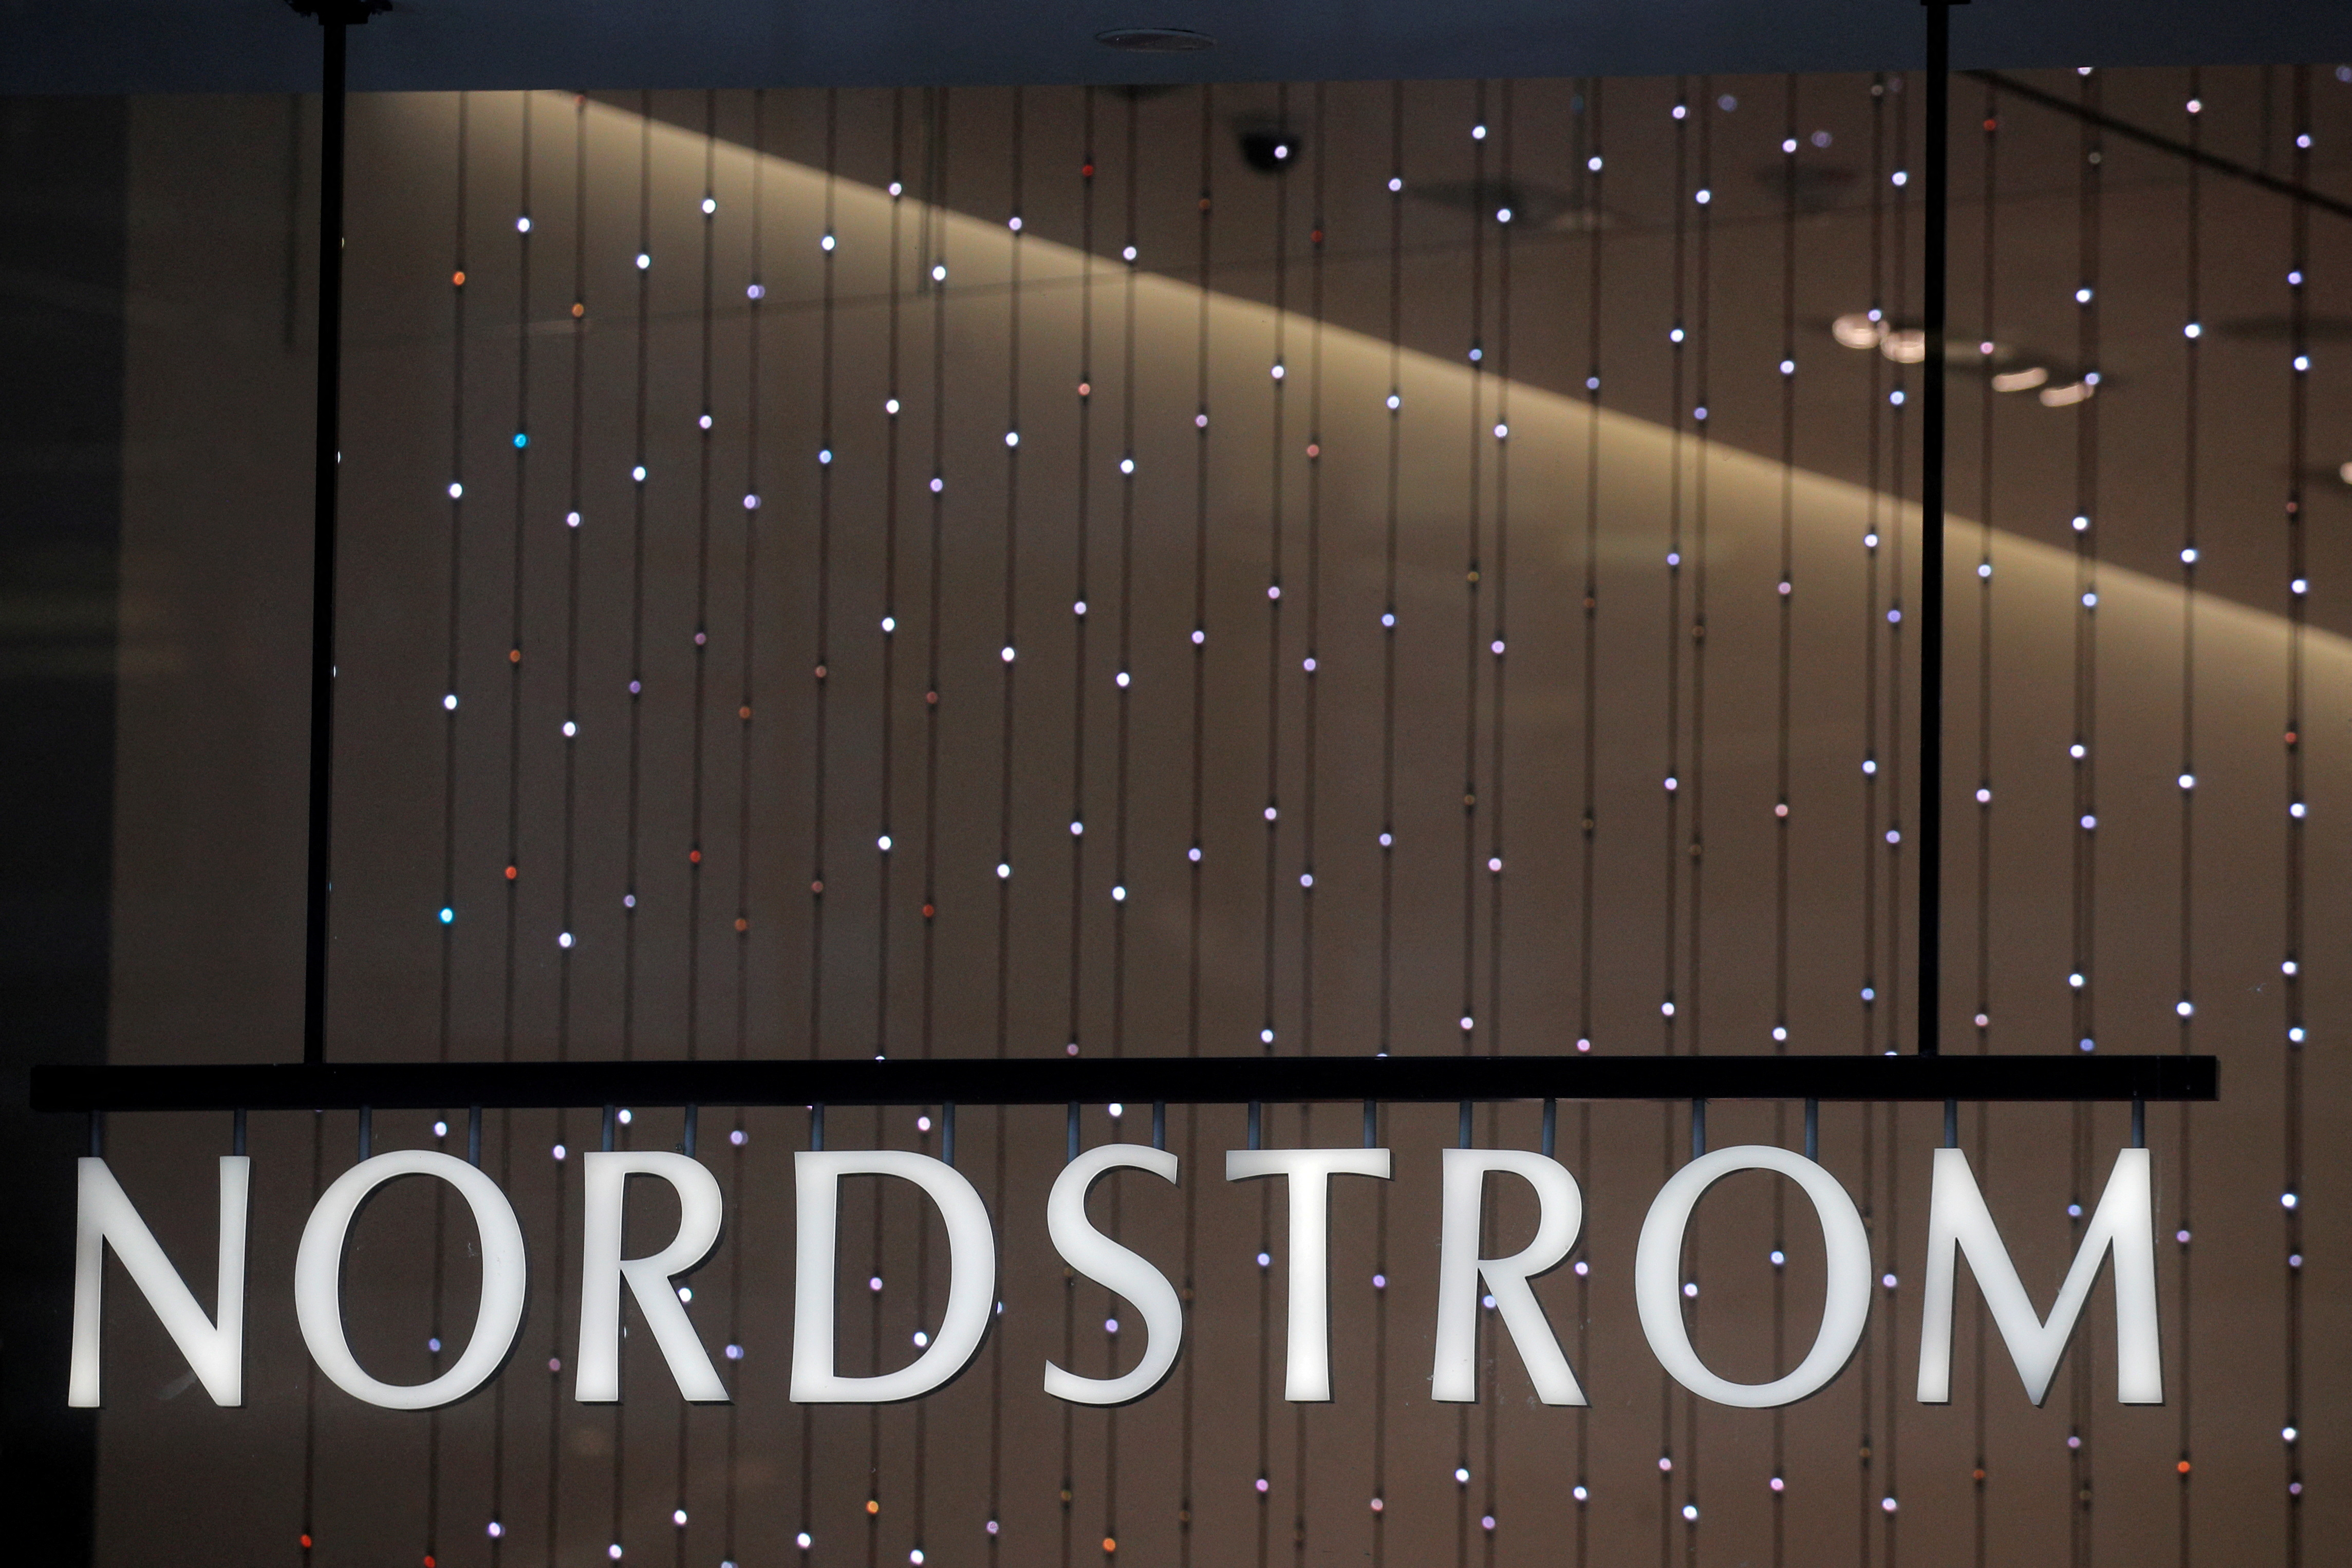 Nordstrom is a Great Place to Shop. Its Stock May Be a Buy, Too